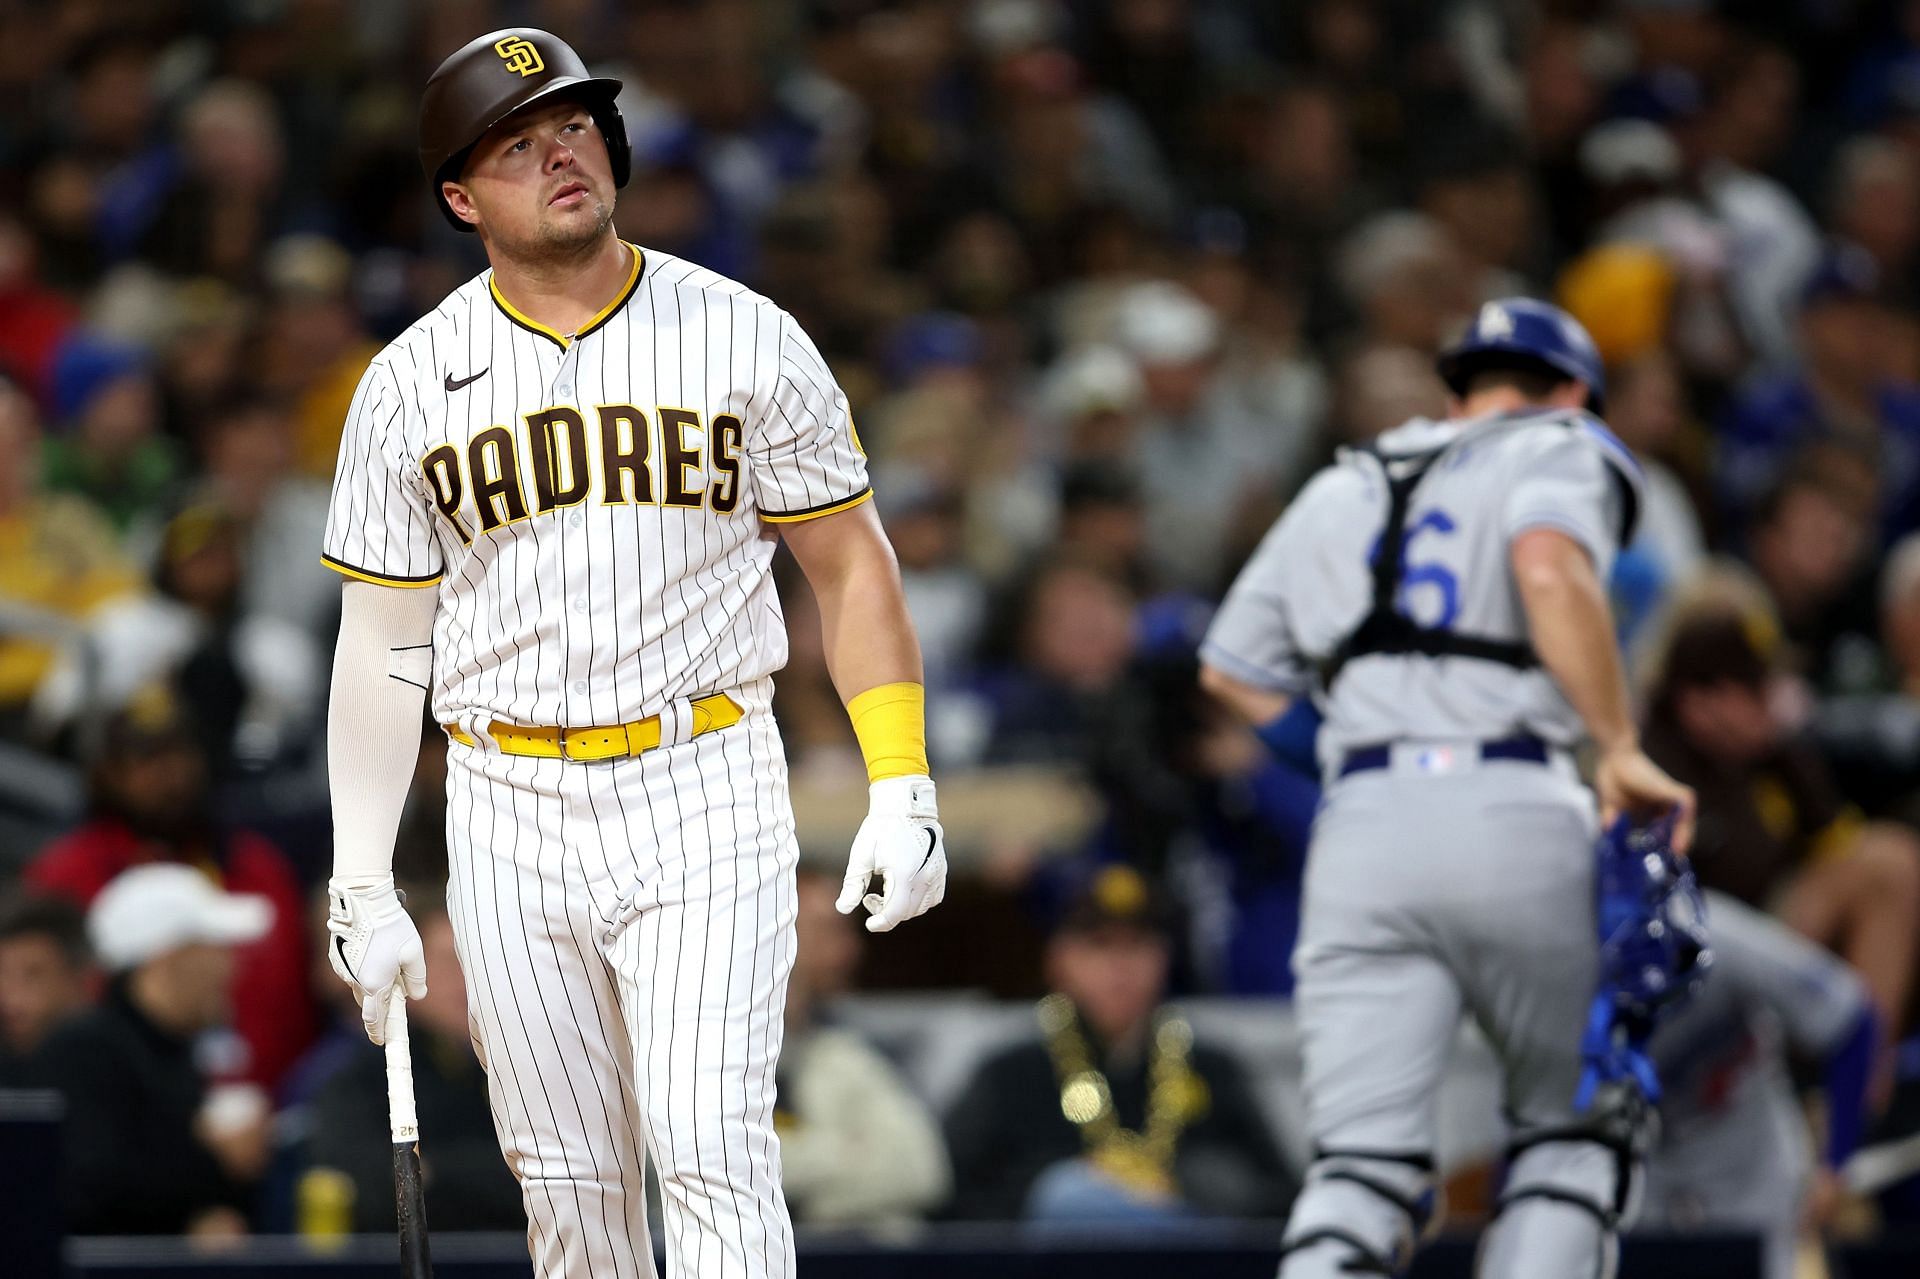 Luke Voit arrived in SoCal from the Bronx in the offseason.